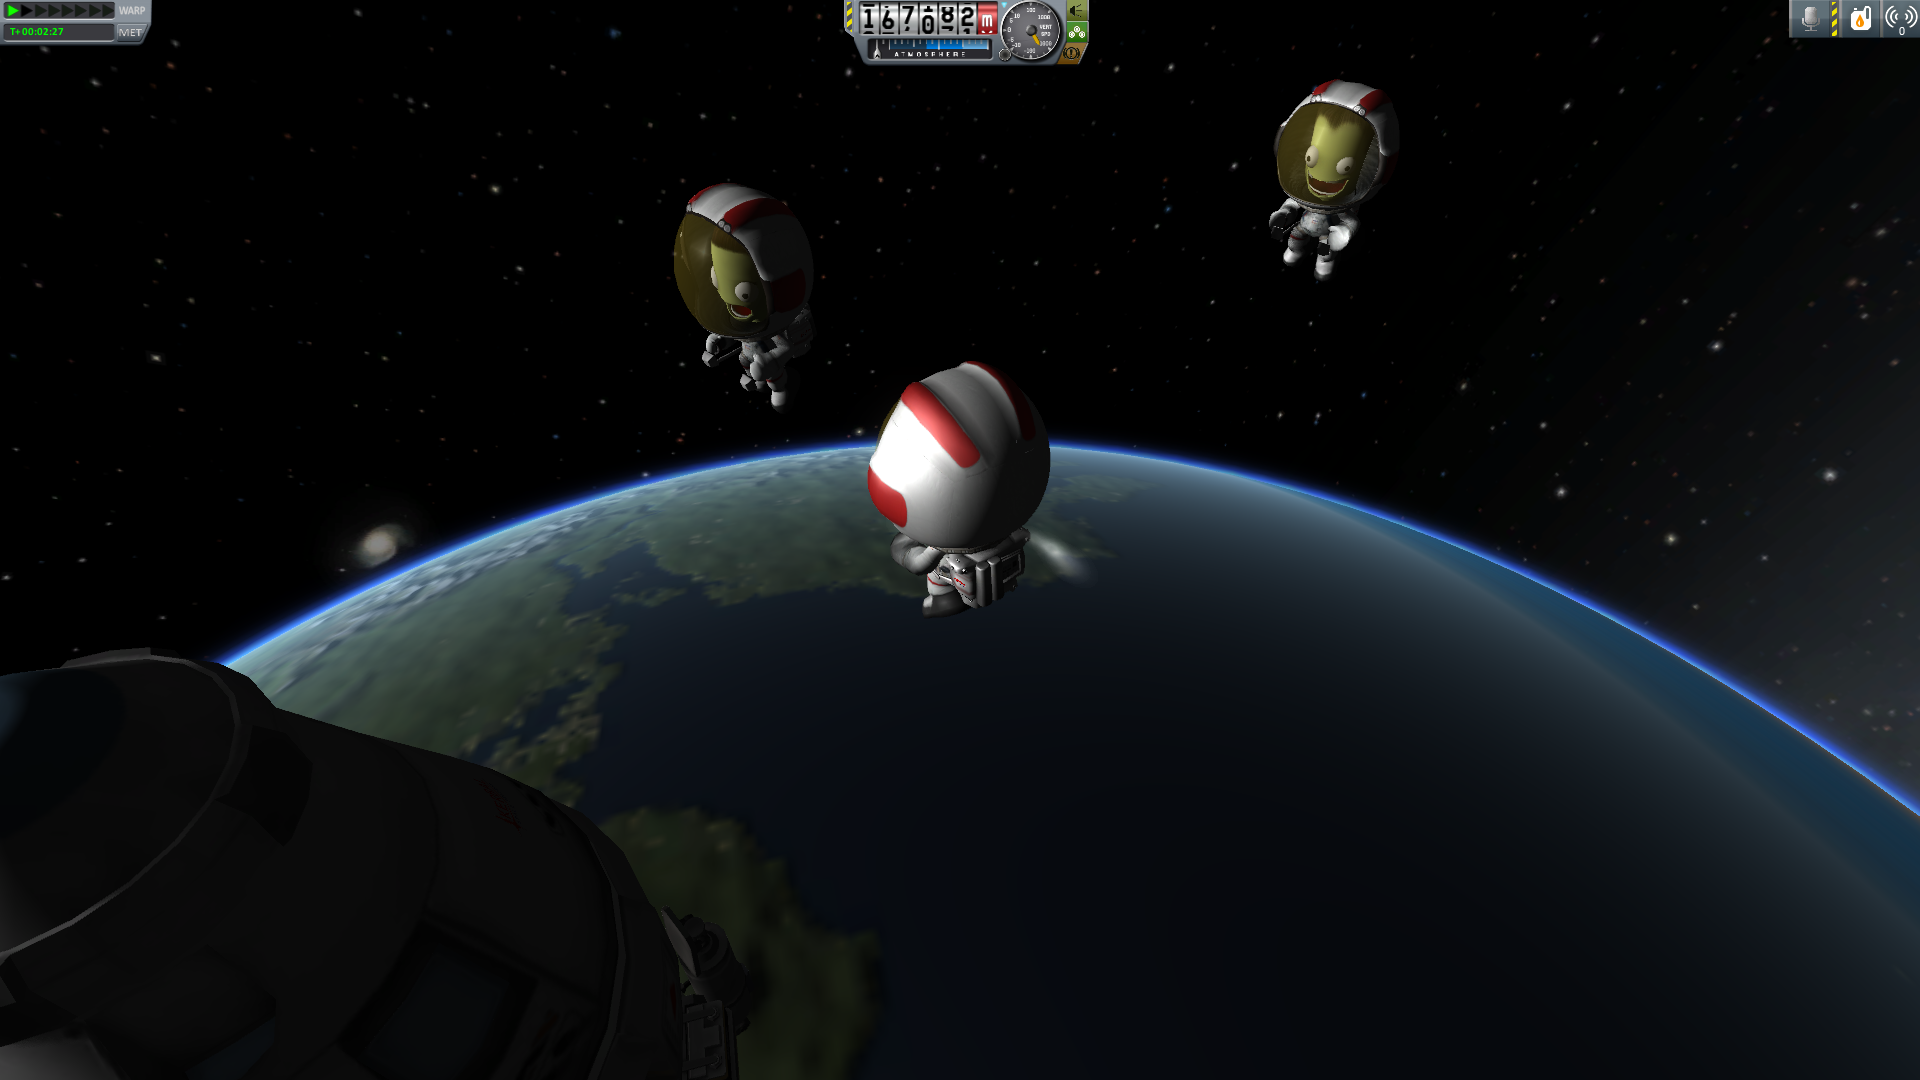 kerbal space program xbox one contracts